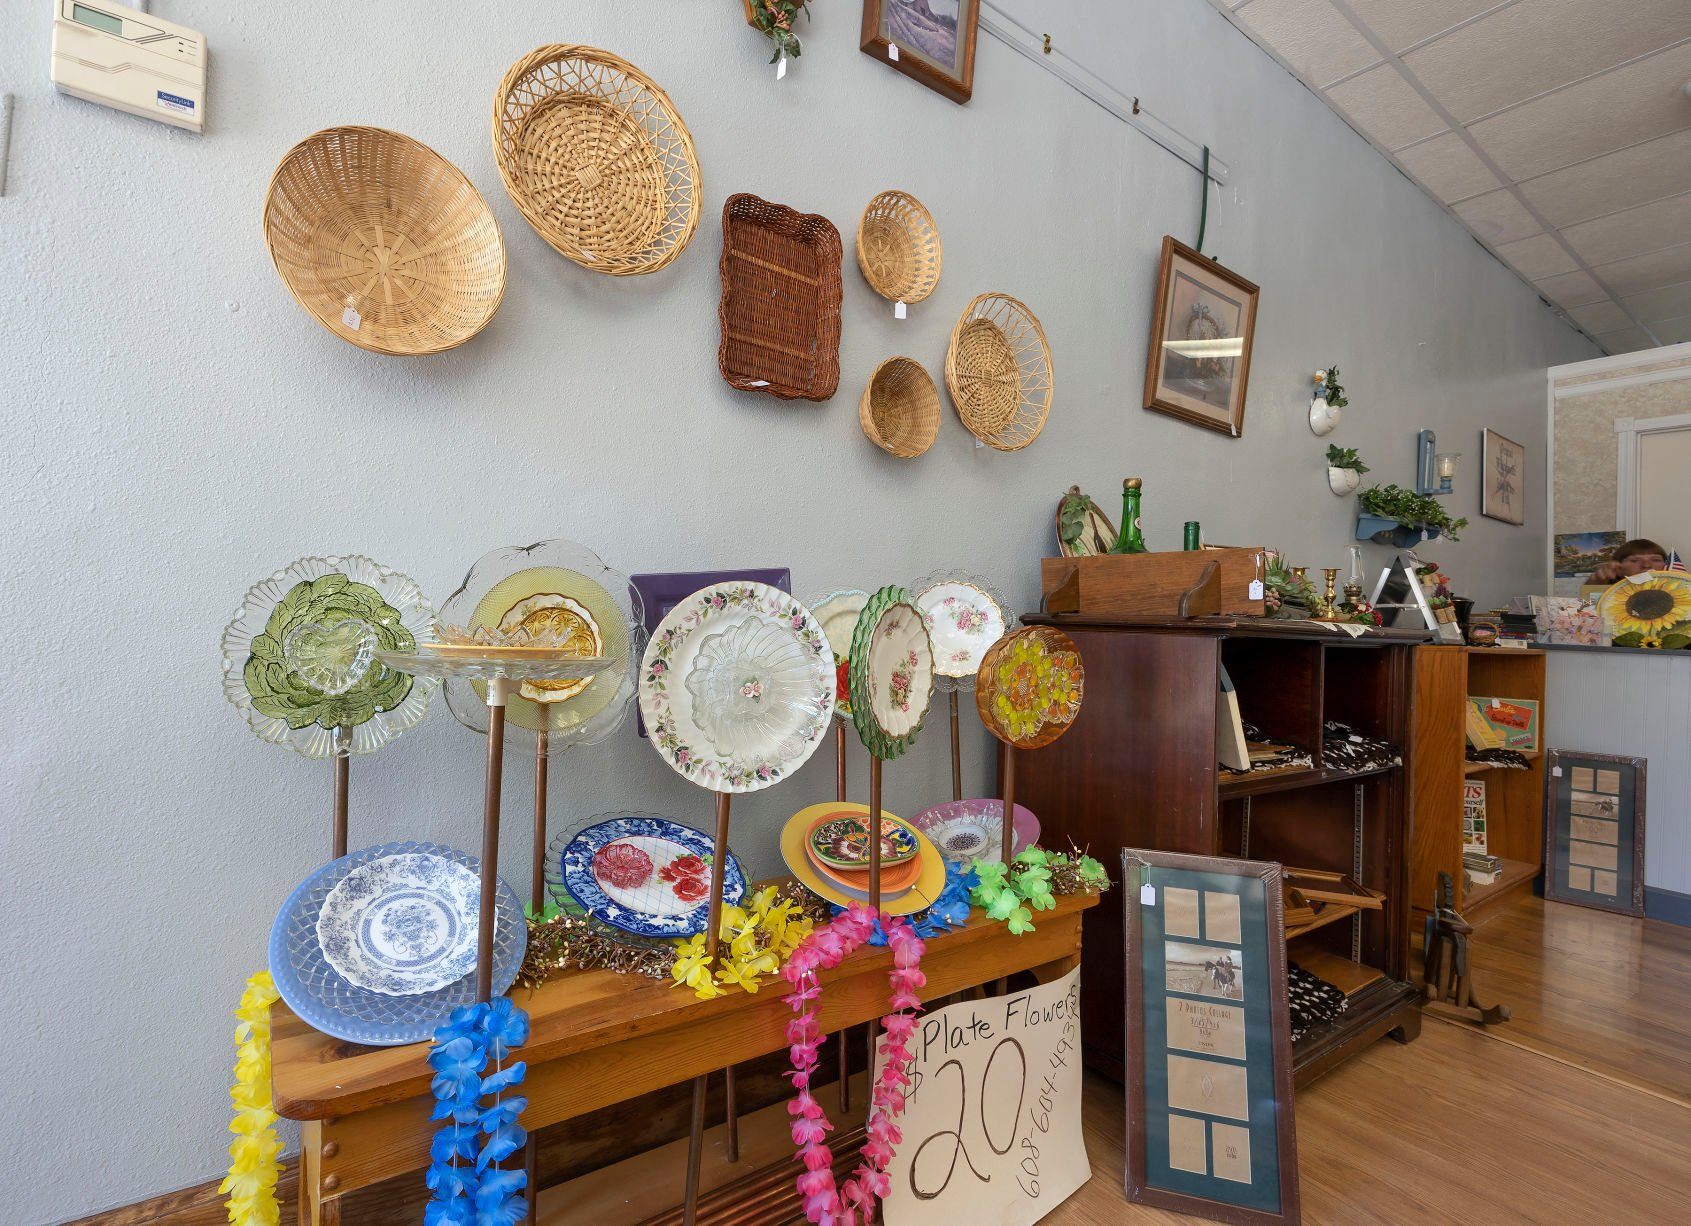 A Little Bit of Everything is a new shop open on Main Street in Potosi, Wis.    PHOTO CREDIT: Stephen Gassman